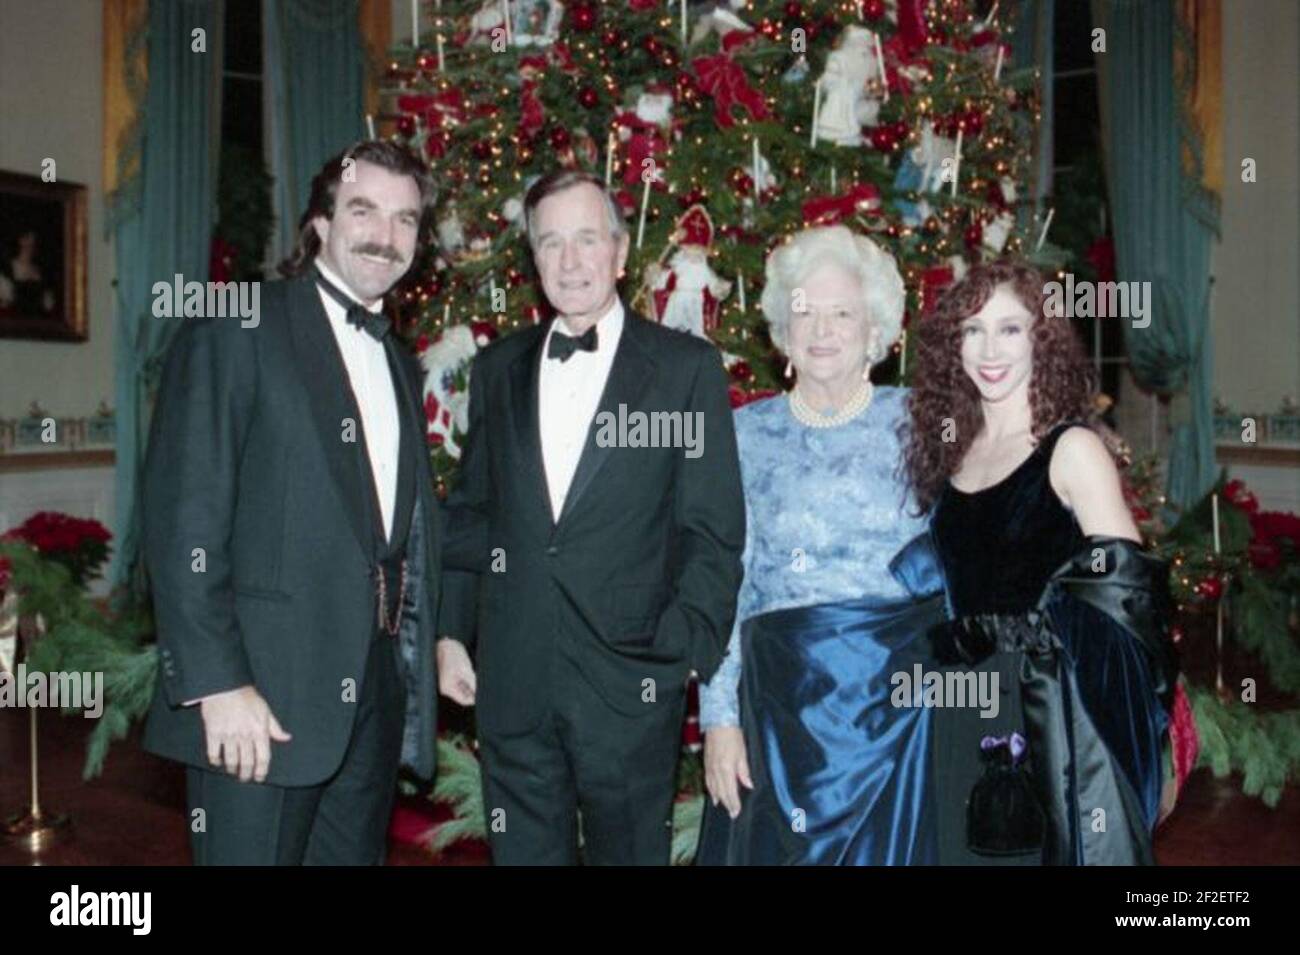 President George H. W. Bush and Barbara Bush pose for a picture with Tom Selleck and his wife at a reception for Kennedy Center Honorees. Stock Photo